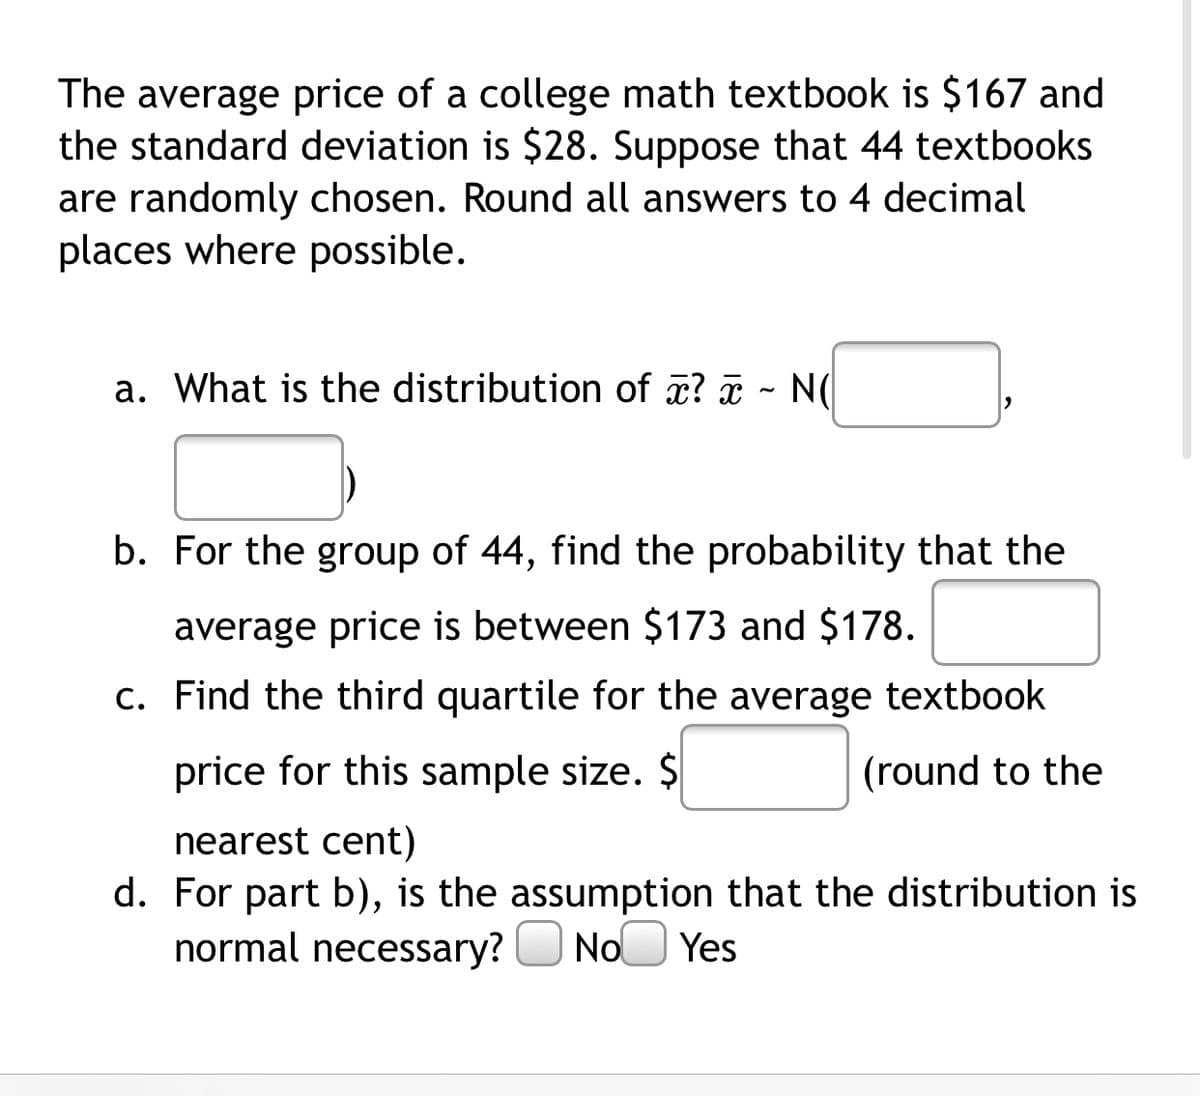 The average price of a college math textbook is $167 and
the standard deviation is $28. Suppose that 44 textbooks
are randomly chosen. Round all answers to 4 decimal
places where possible.
a. What is the distribution of æ? ¤ - N(
b. For the group of 44, find the probability that the
average price is between $173 and $178.
c. Find the third quartile for the average textbook
price for this sample size. $
(round to the
nearest cent)
d. For part b), is the assumption that the distribution is
normal necessary?
NoO Yes
